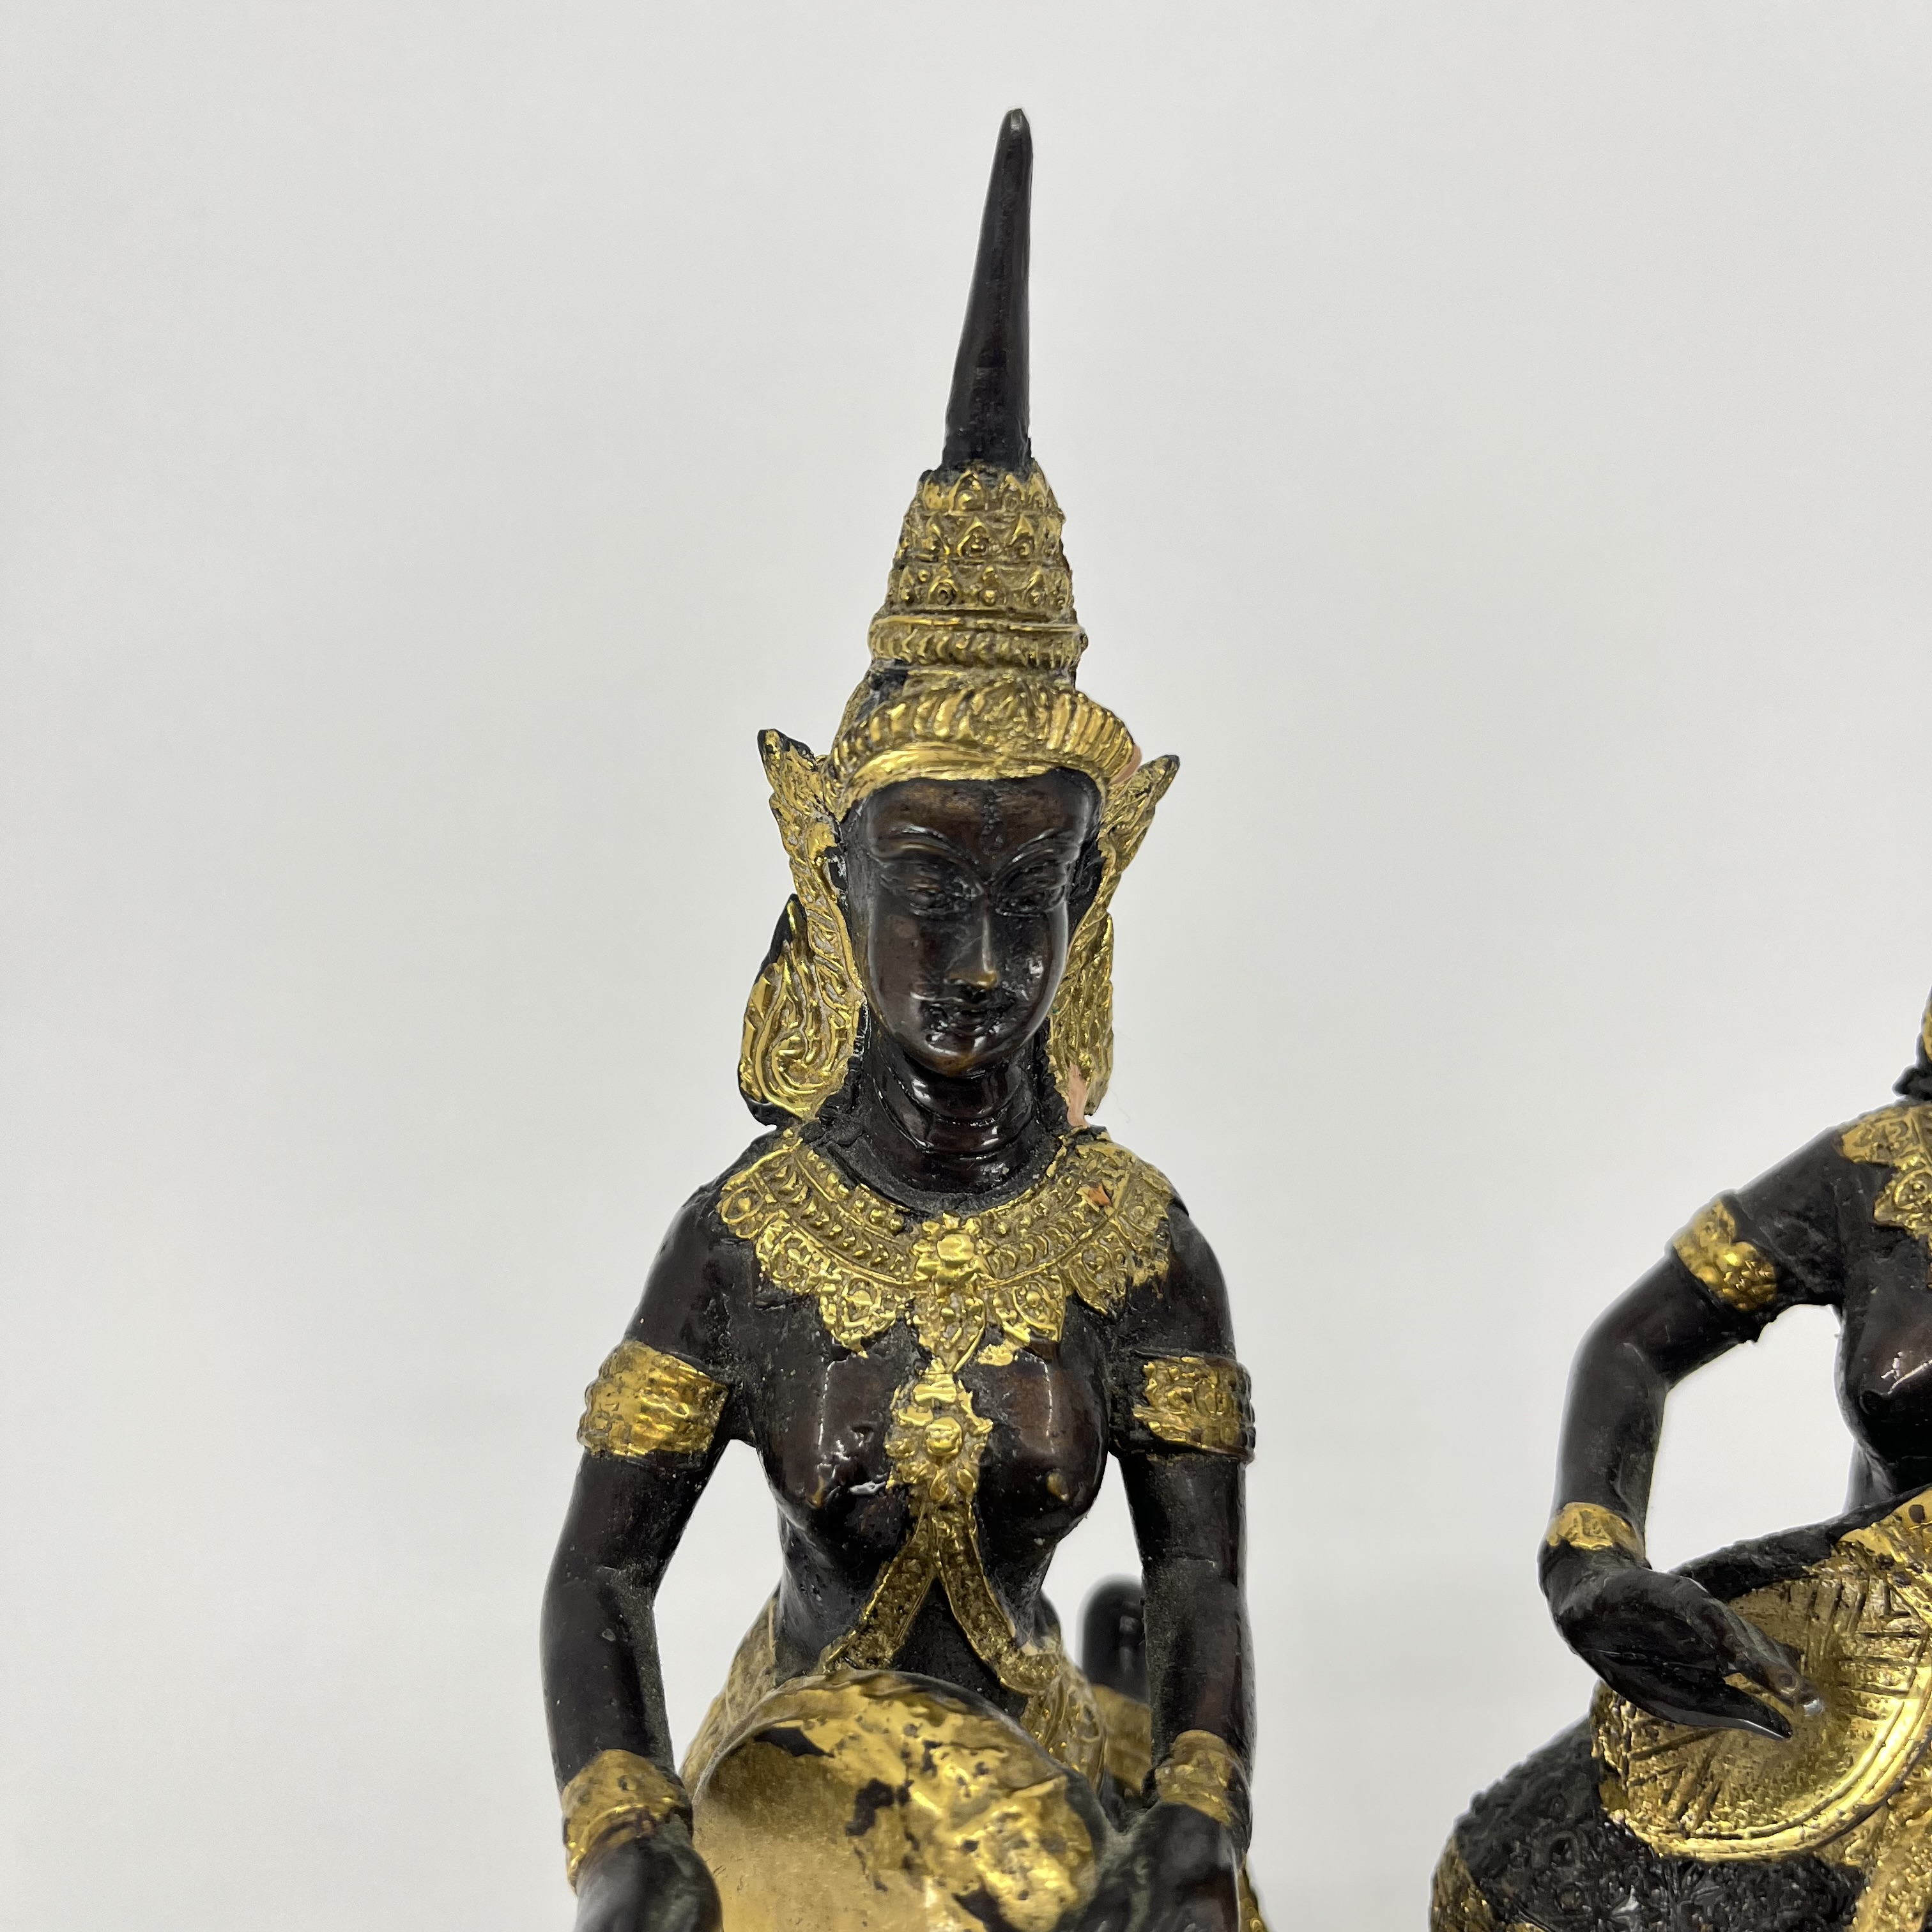 A Pair of Gilded Bronze Thai Theppanom Angel Temple Musician Figurines - Image 5 of 7